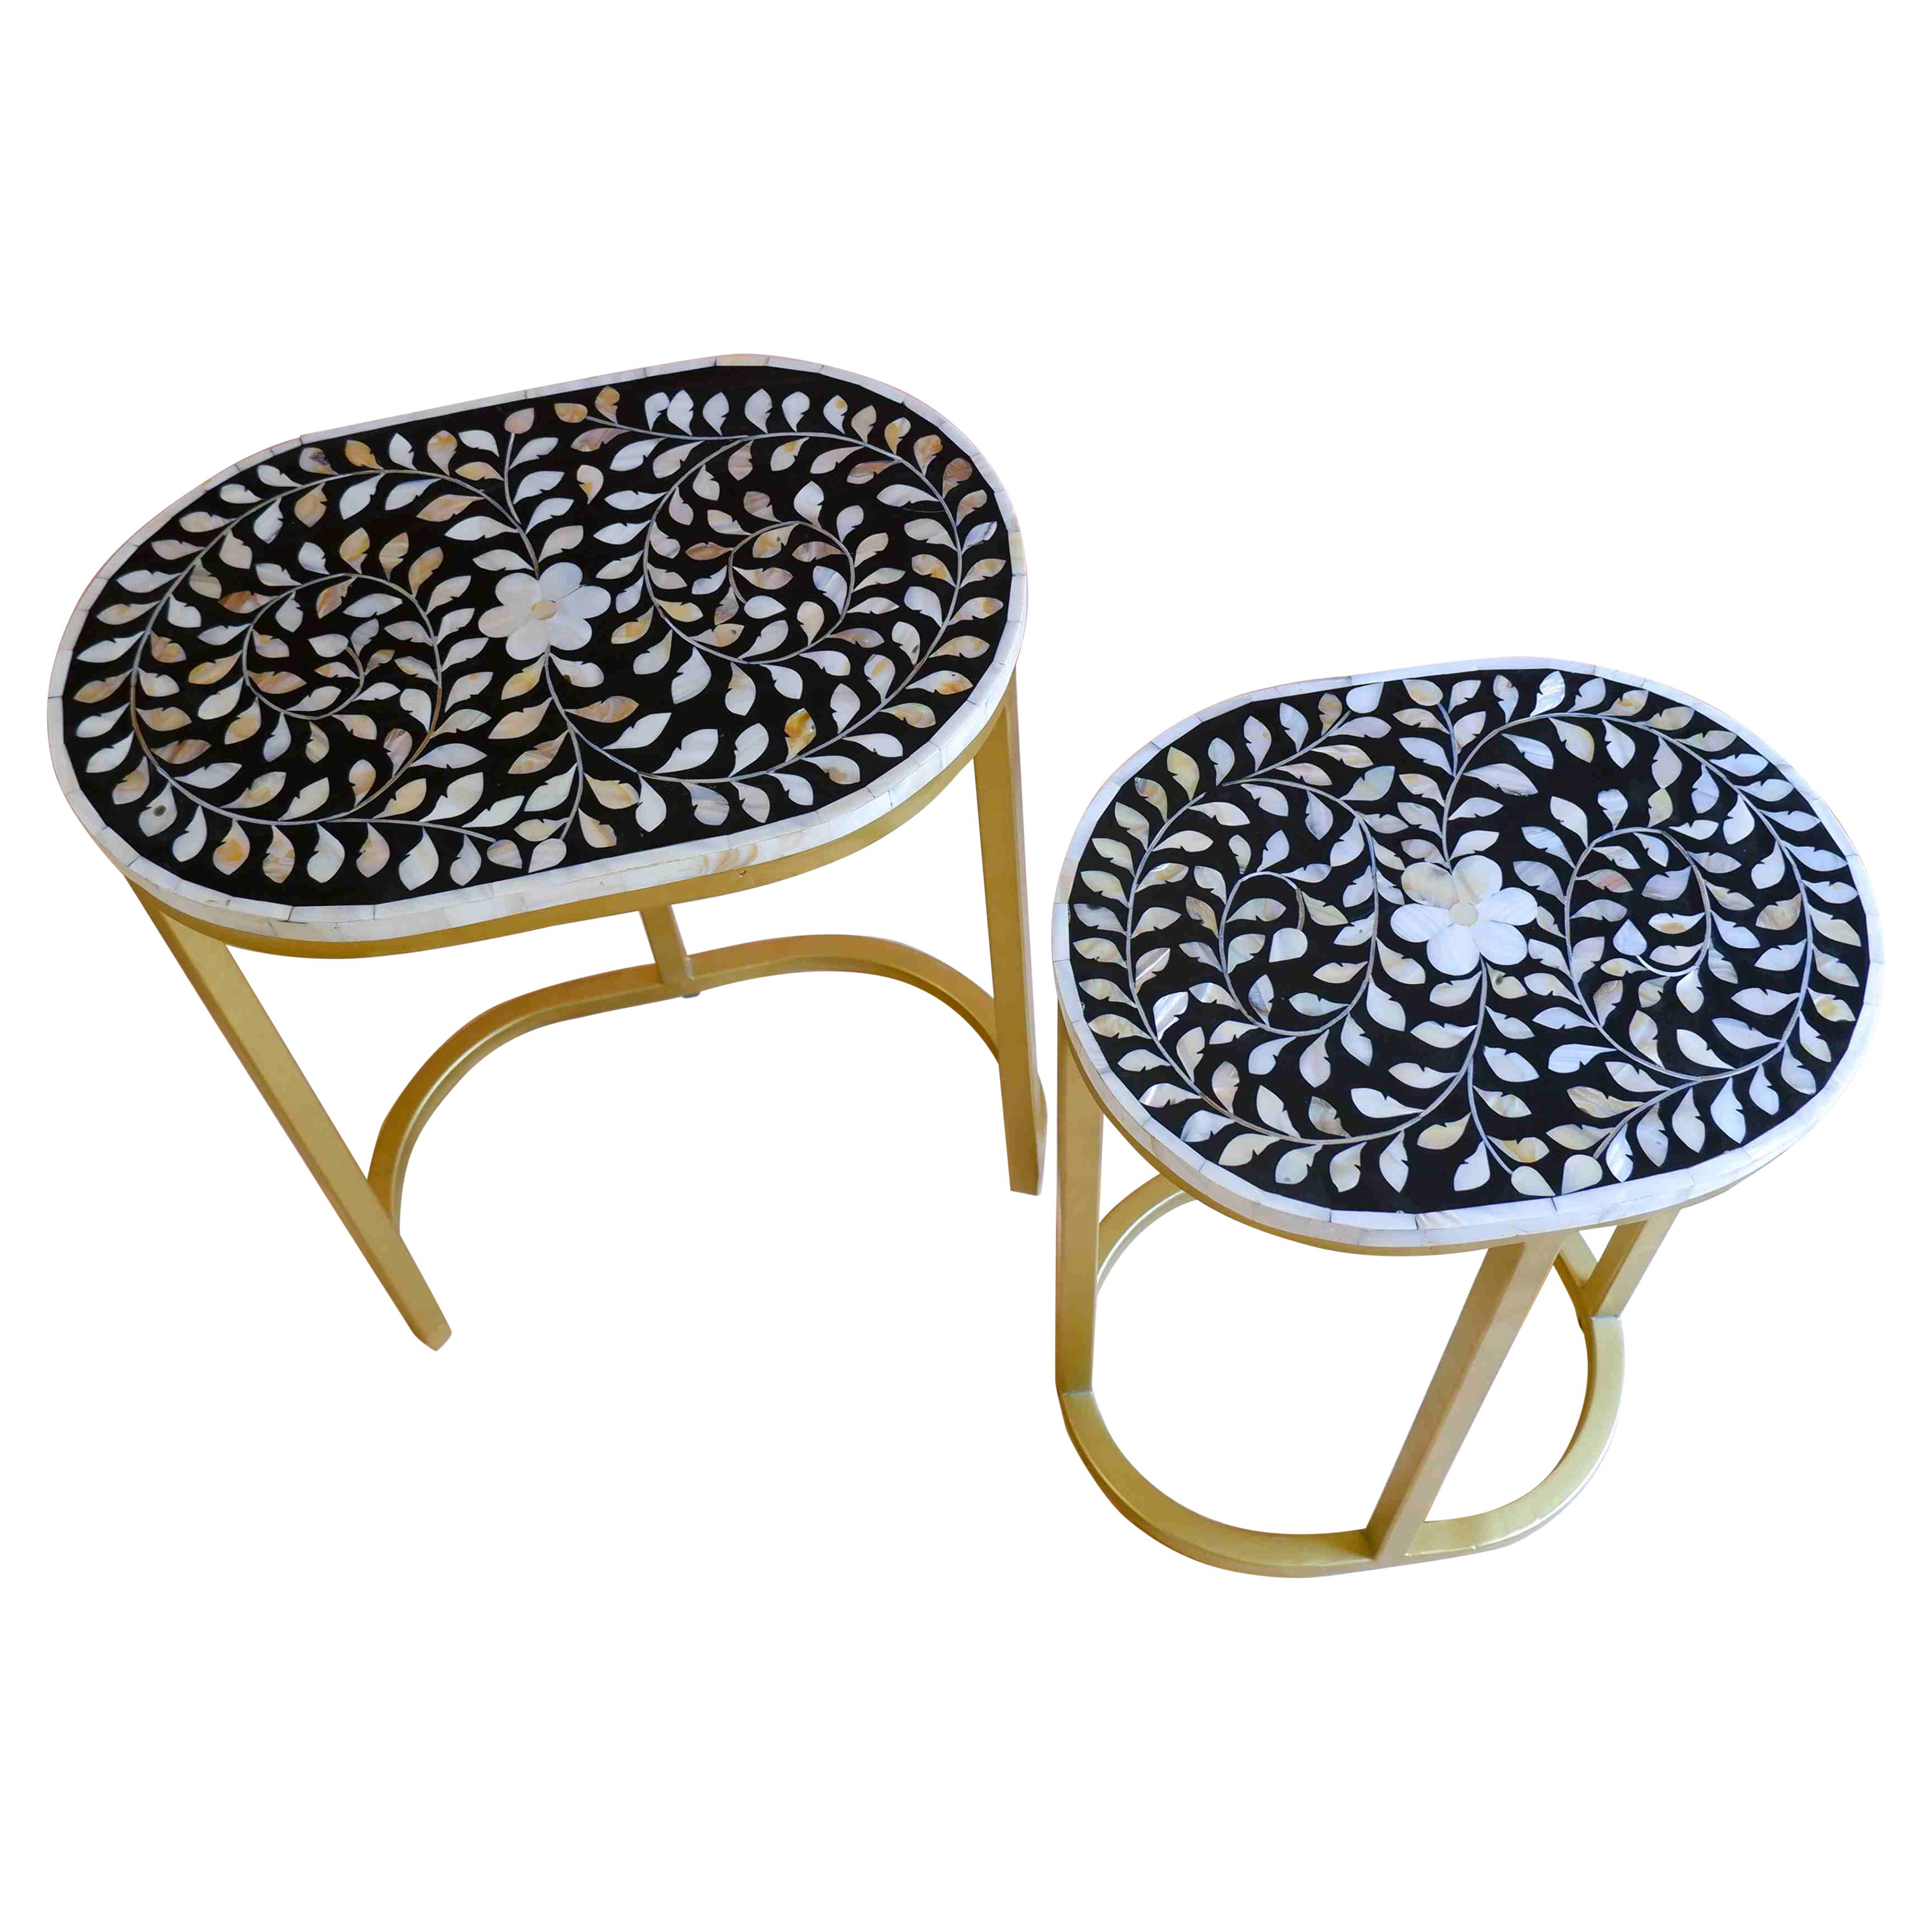 Coil Mother of Pearl Inlay Nesting Tables For Sale